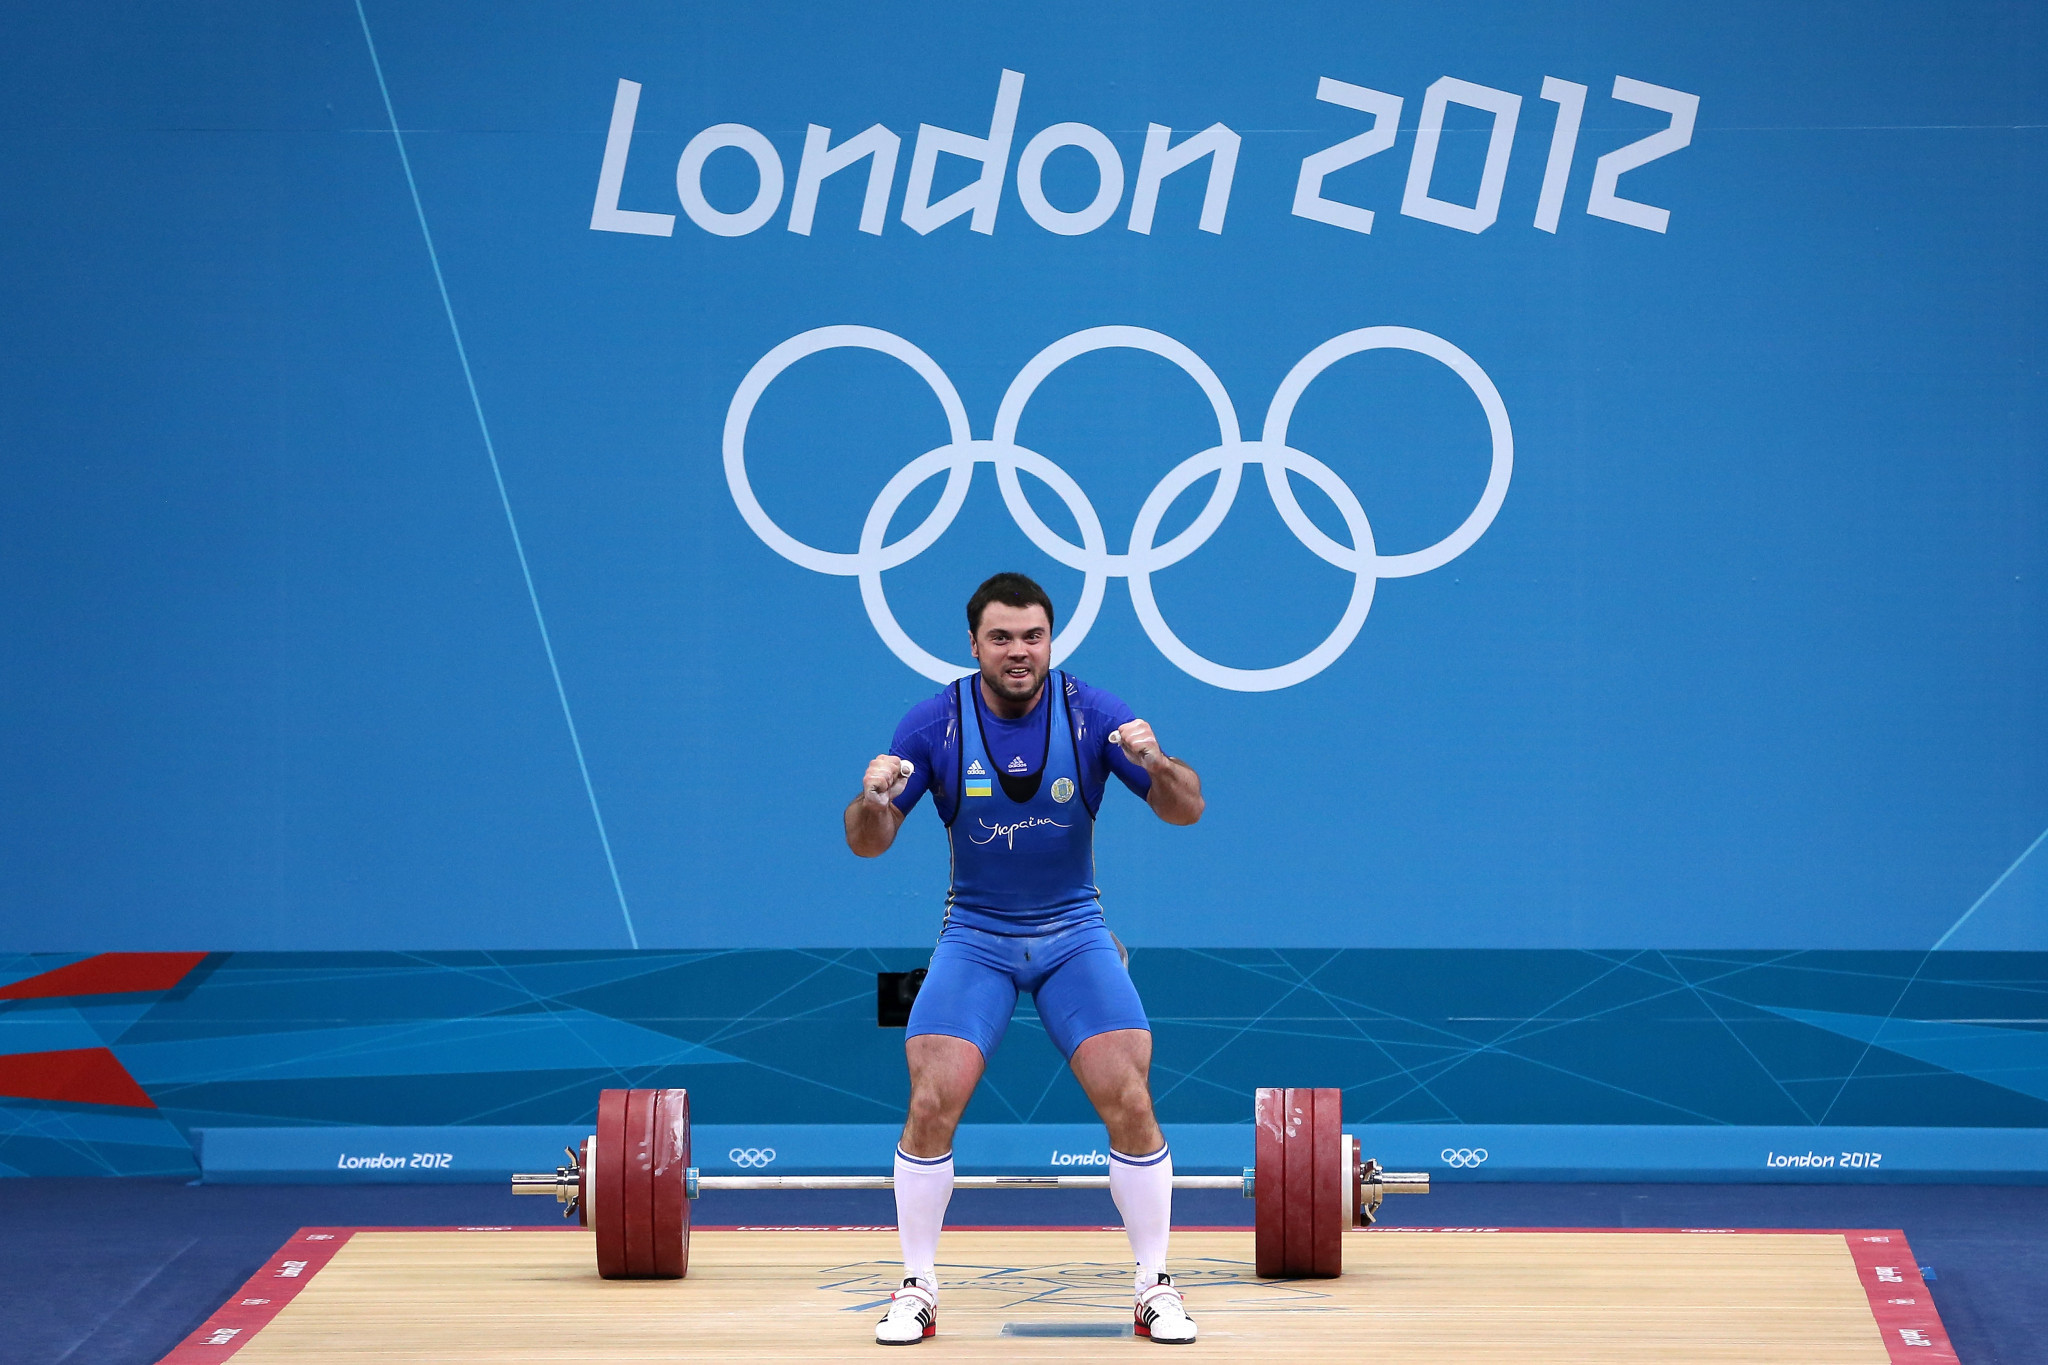 Ukrainian Oleksiy Torokhtiy was disqualified for a doping offence after winning 105 kilograms gold at the London 2012 Olympics    ©Getty Images